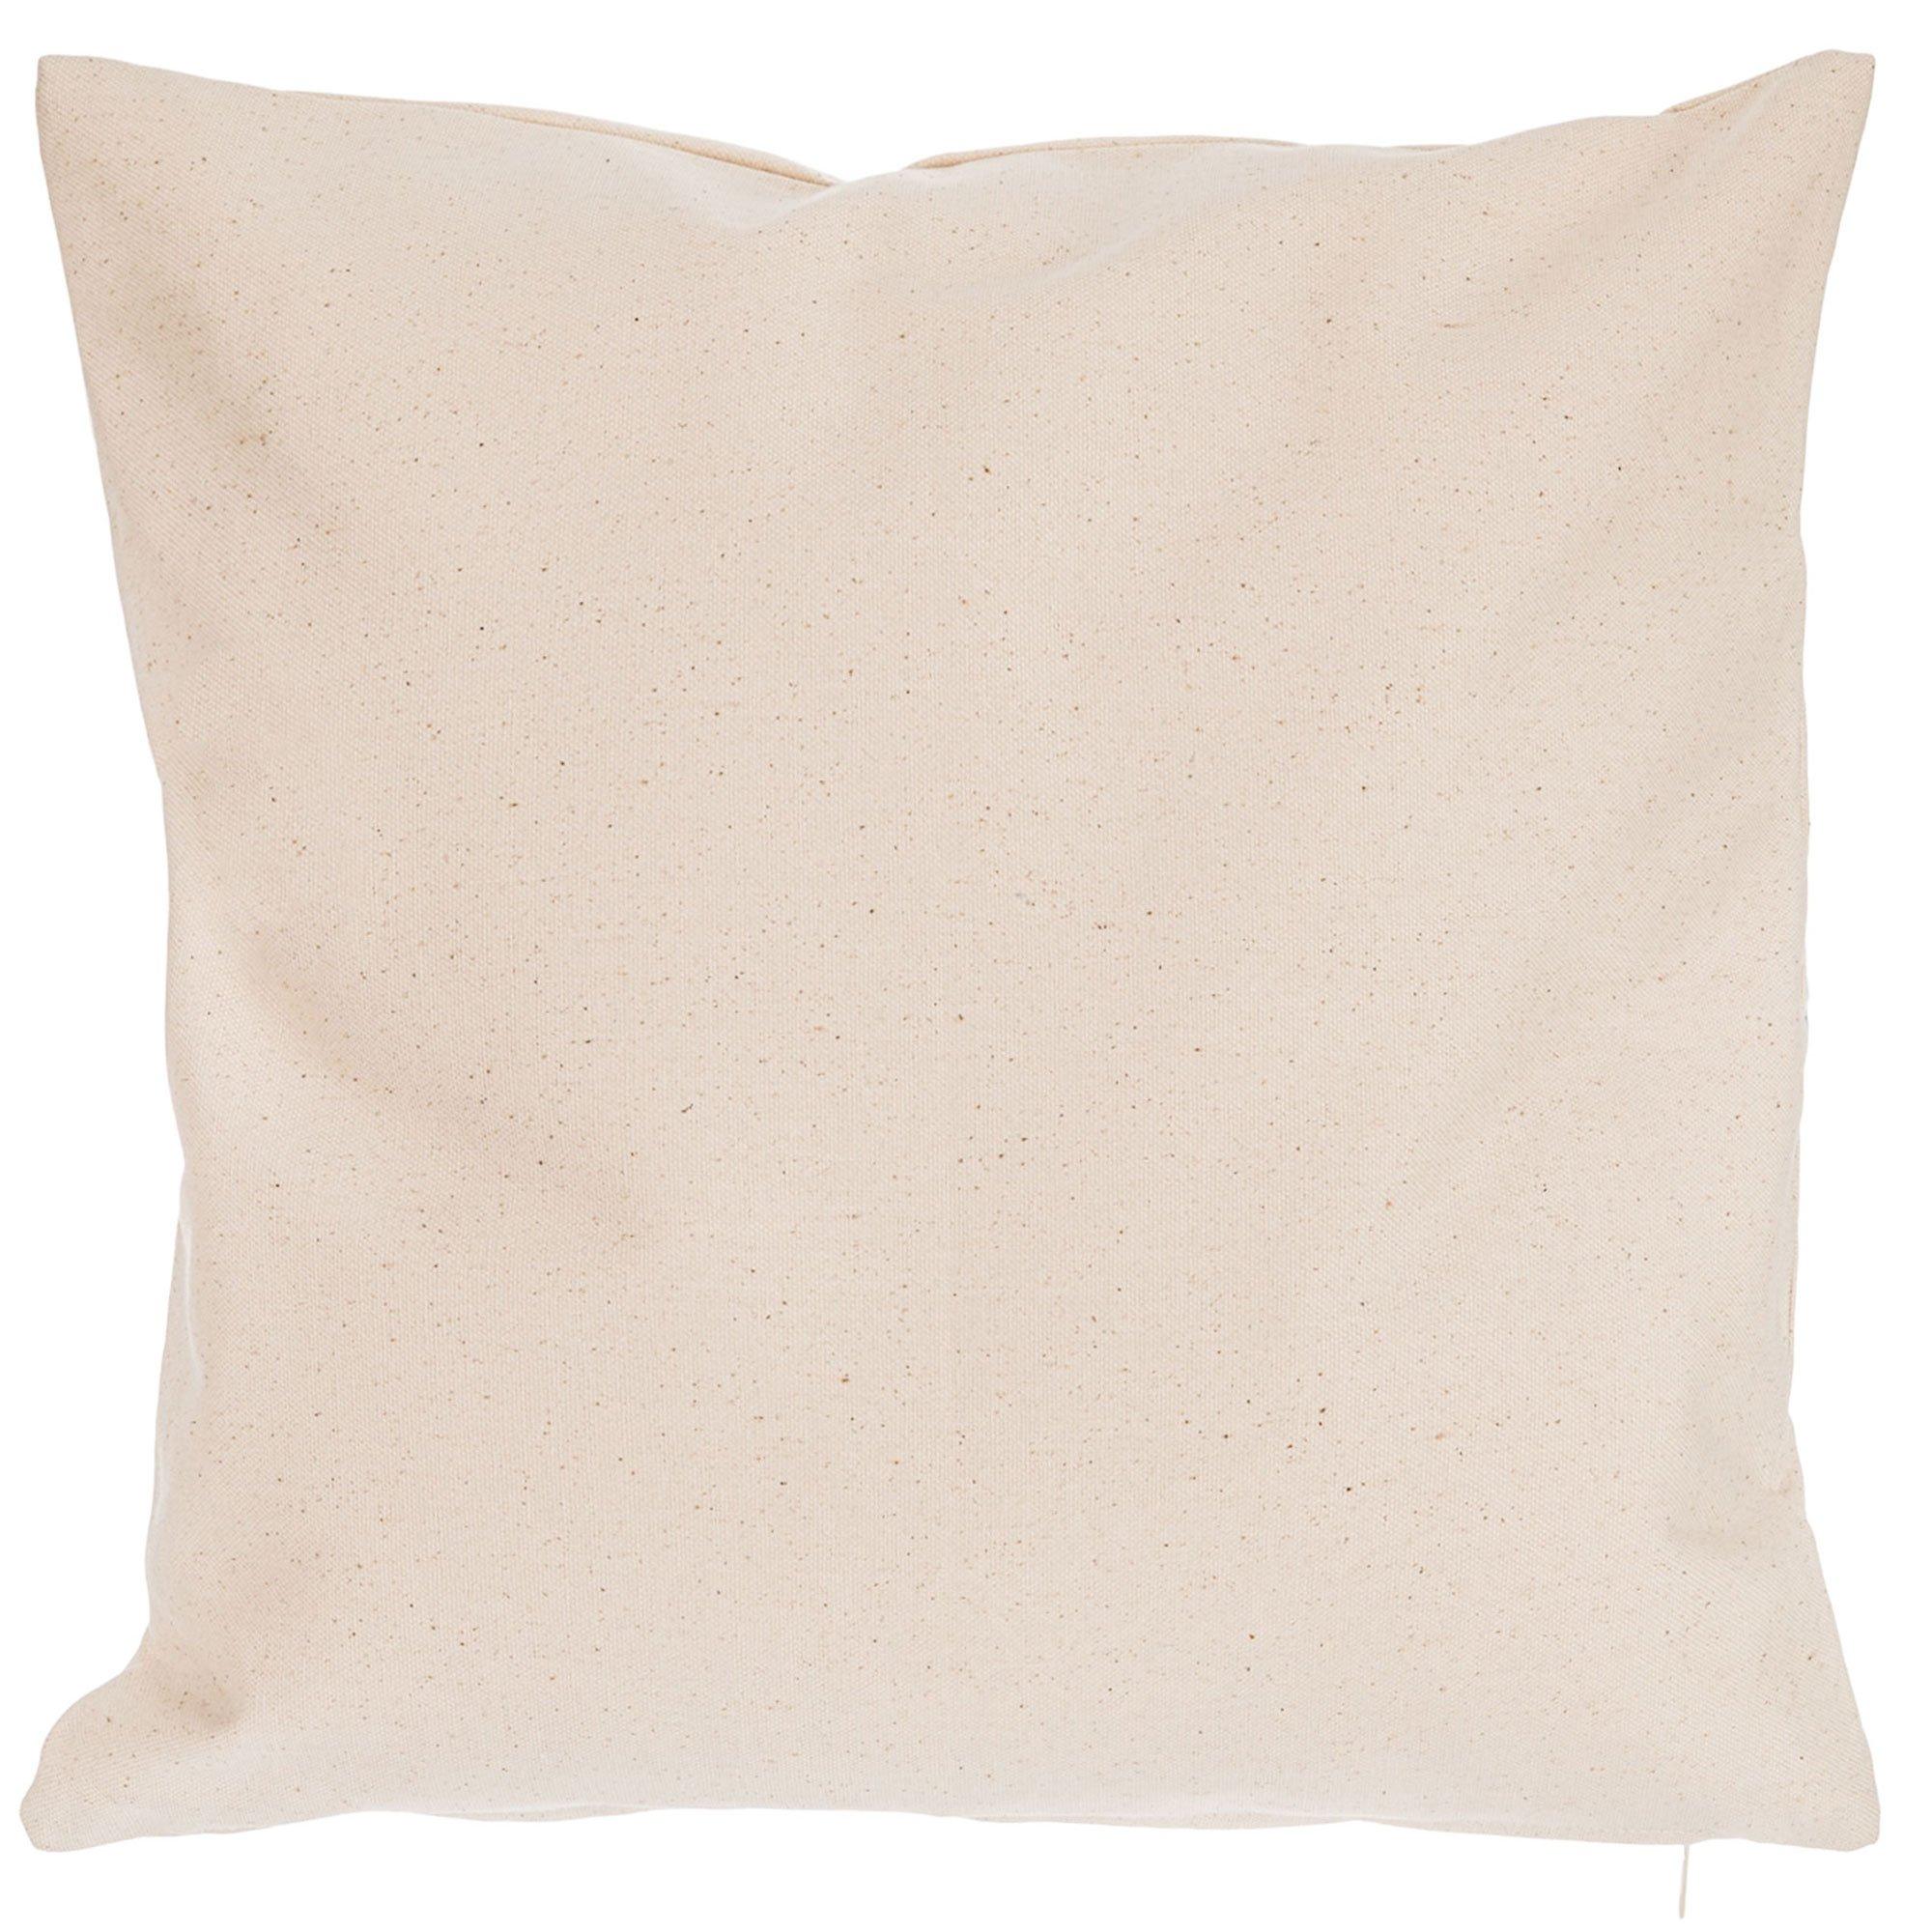 Beige Floral Embroidered Pillow Cover, Hobby Lobby